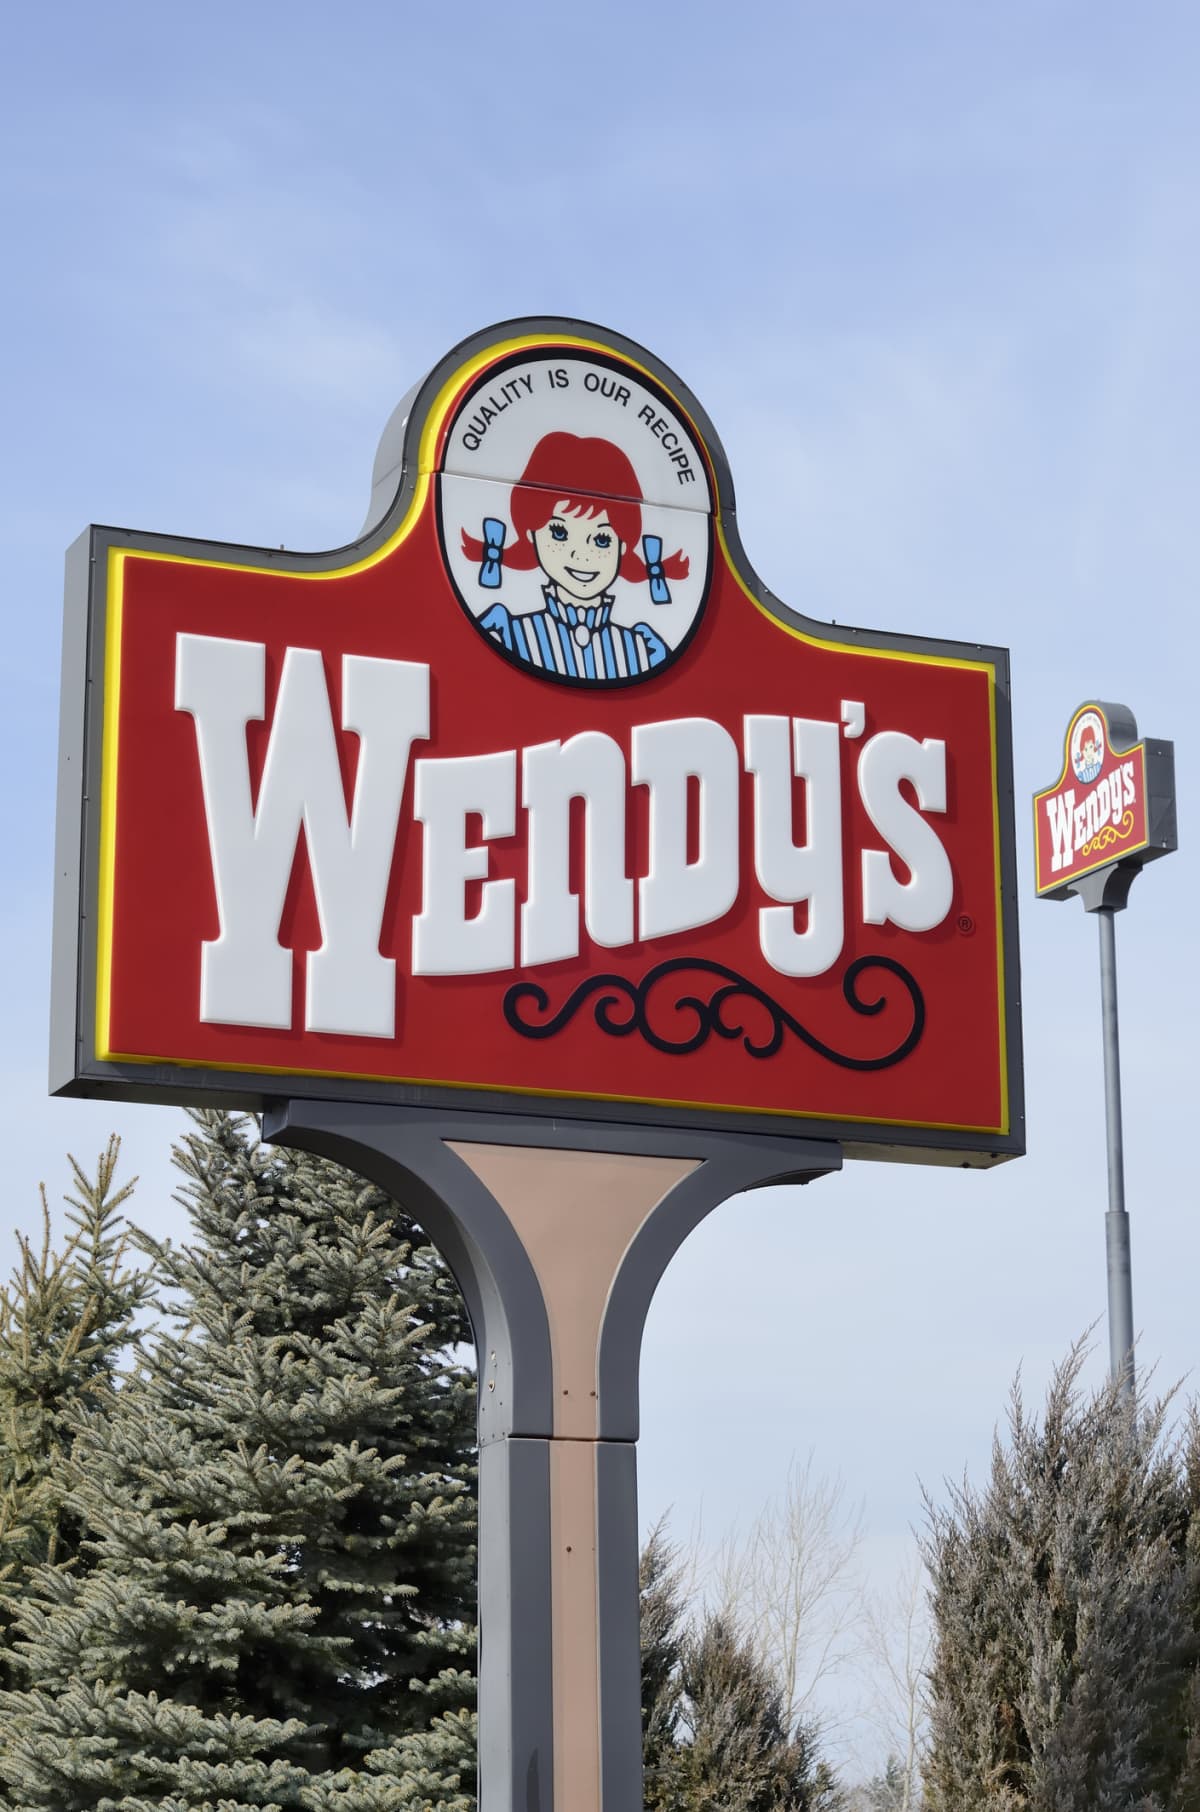 "Clio, Michigan, USA - March 7, 2012: The Wendy's location in Clio, Michigan. Founded in 1969 by Dave Thomas, Wendy's is a chain of fast food restaurants with over 6,600 locations in the US and abroad."